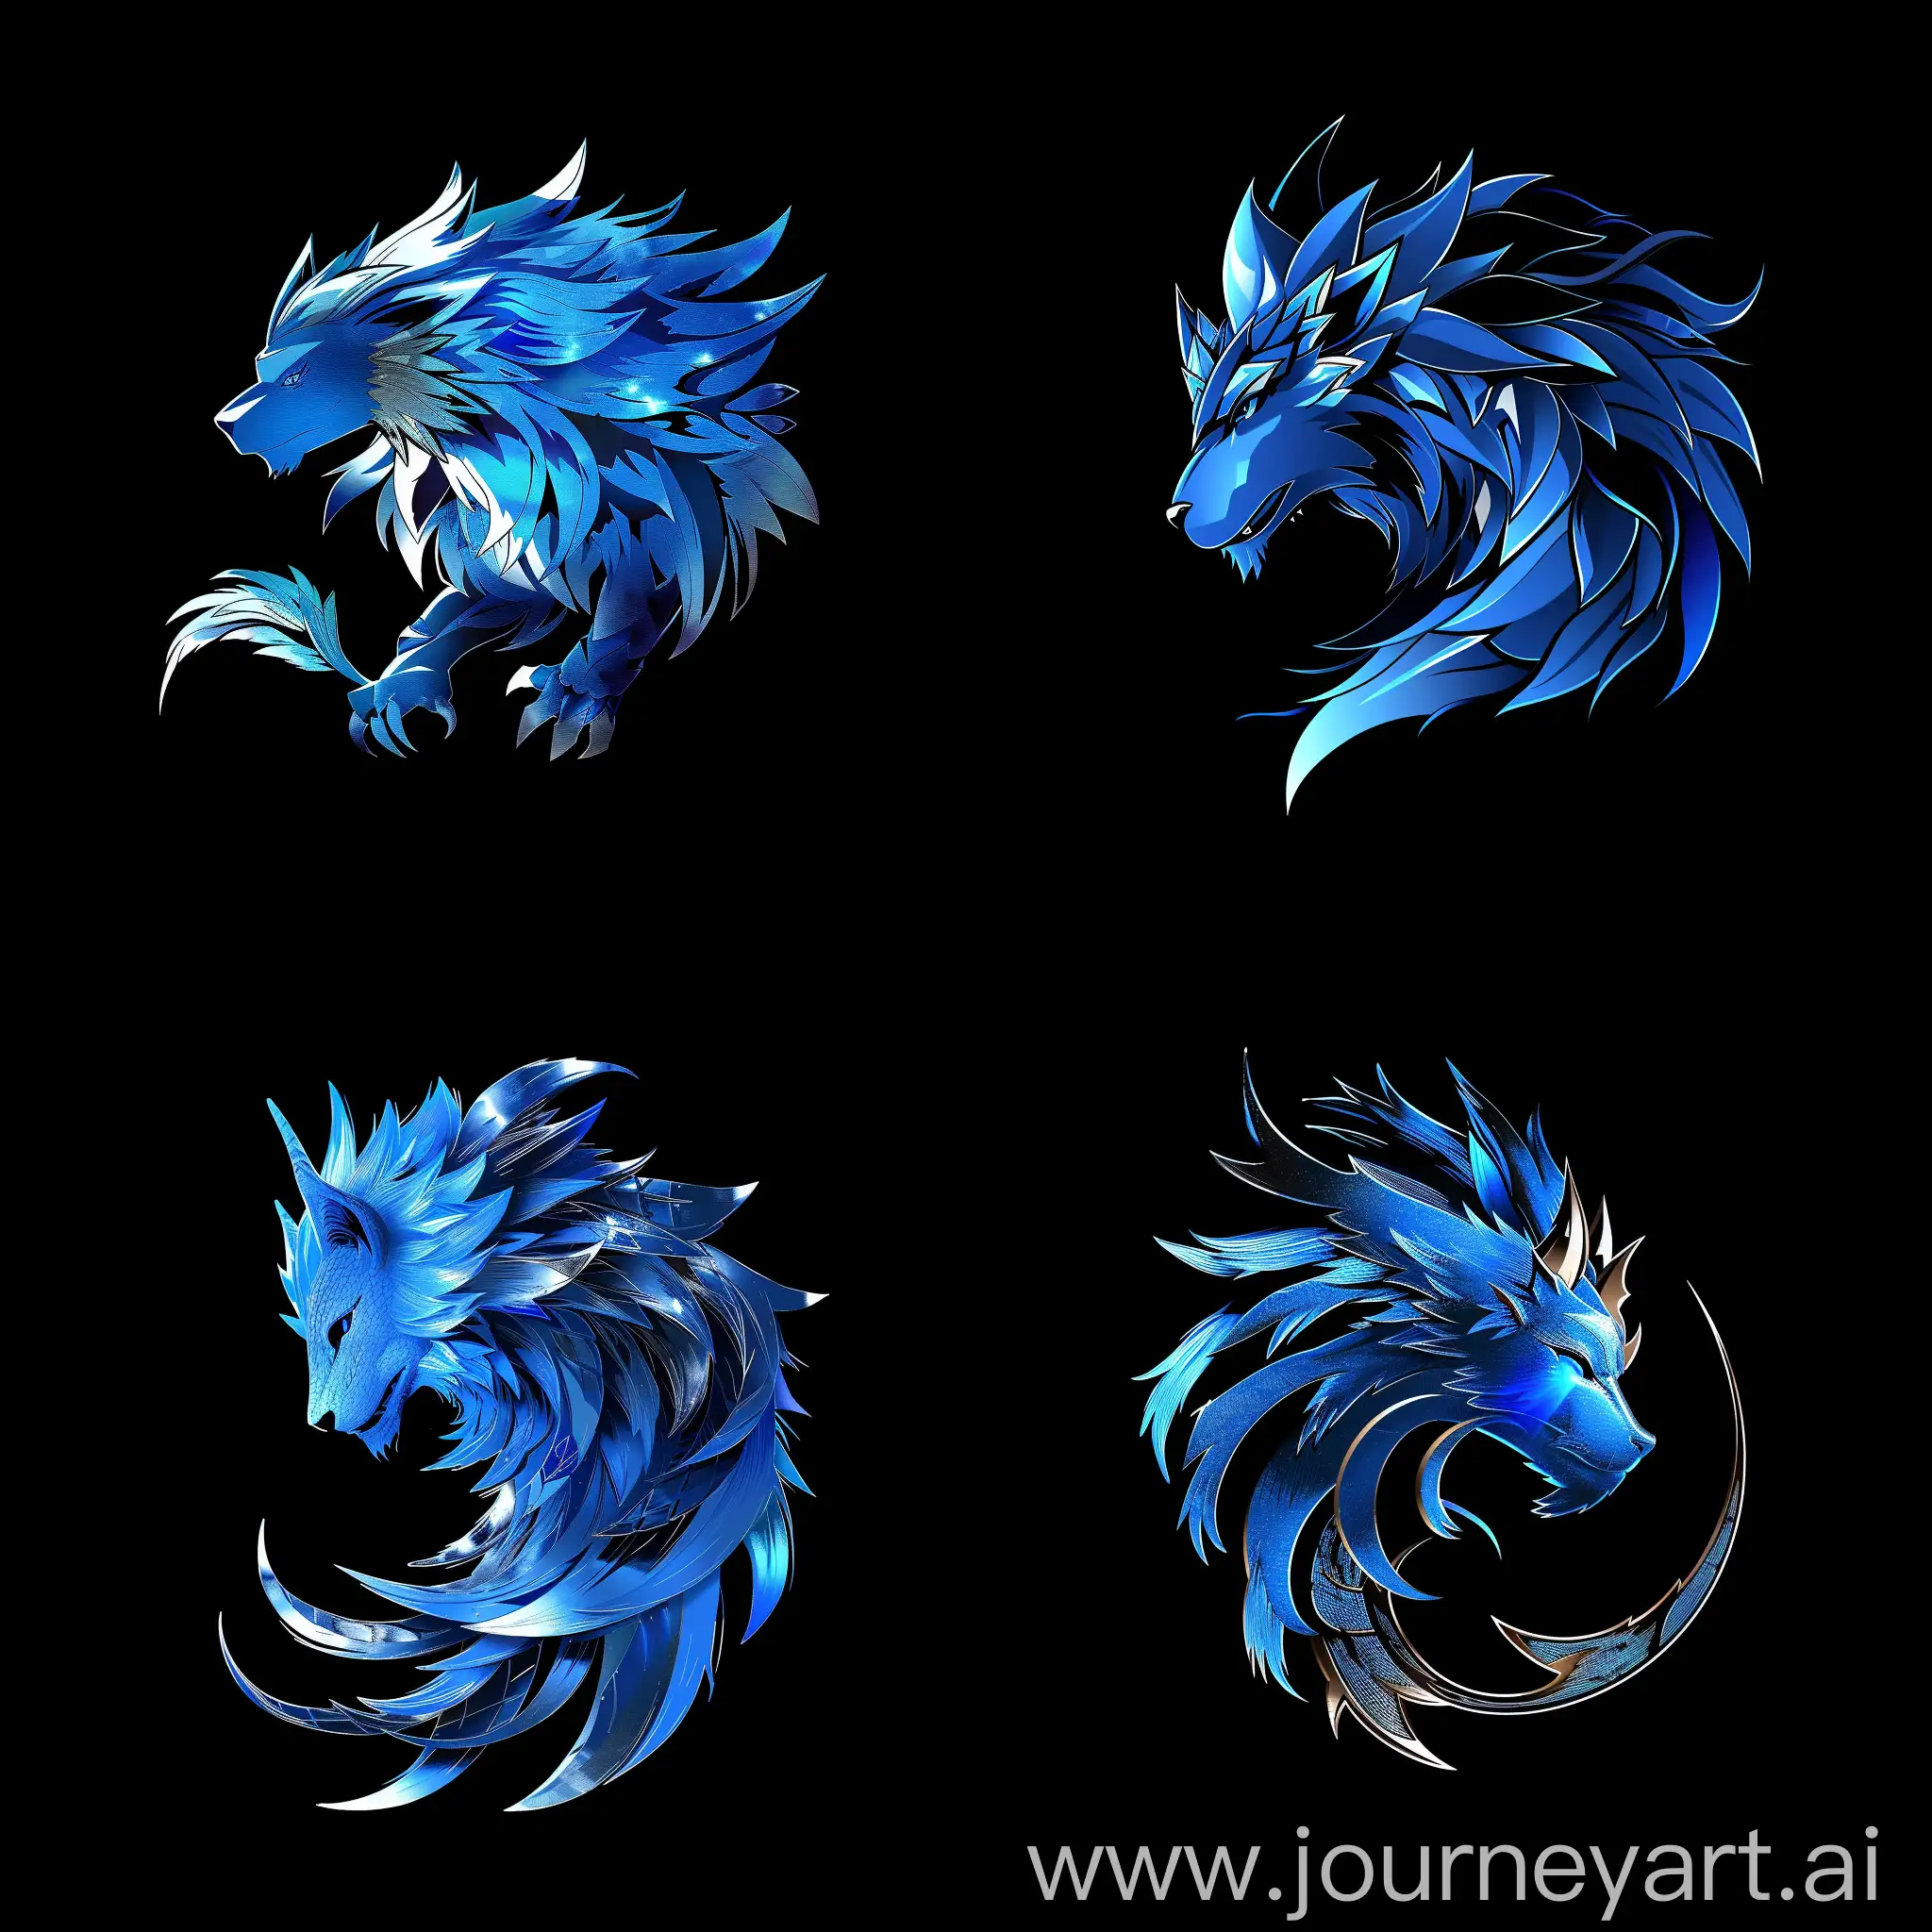 The logo on which the blue Lunastra from the game "Monster hunter: World" is depicted. Background: black. View: from the side